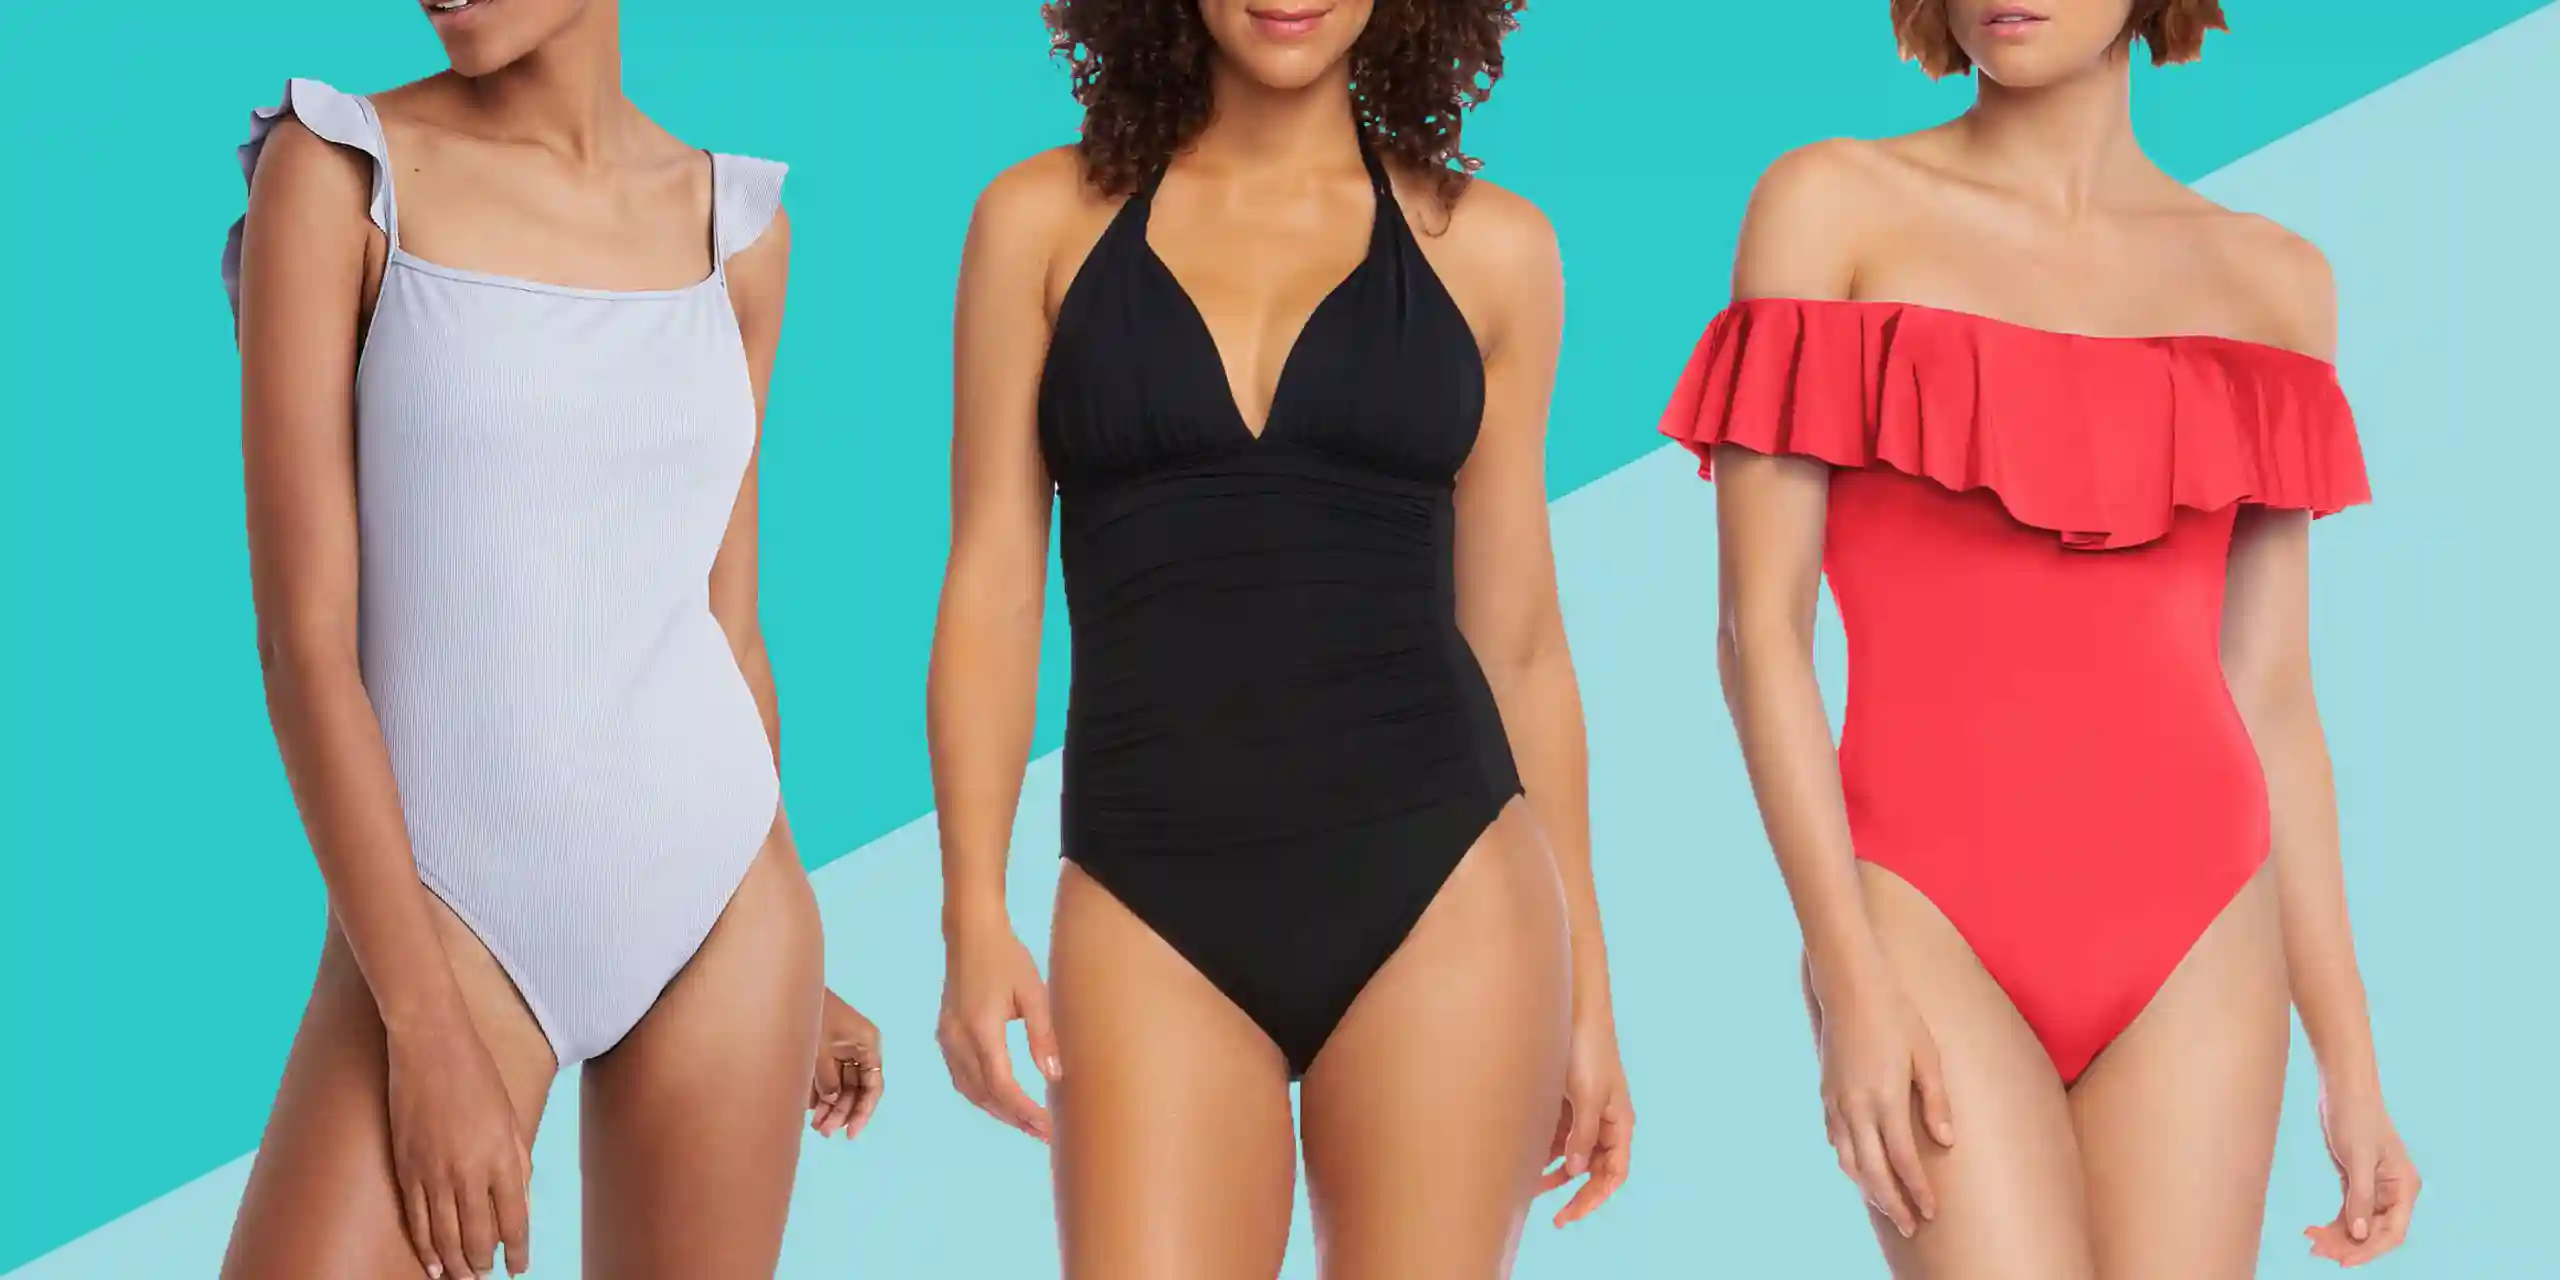 How to Find the Most Comfortable One-Piece Swimwear